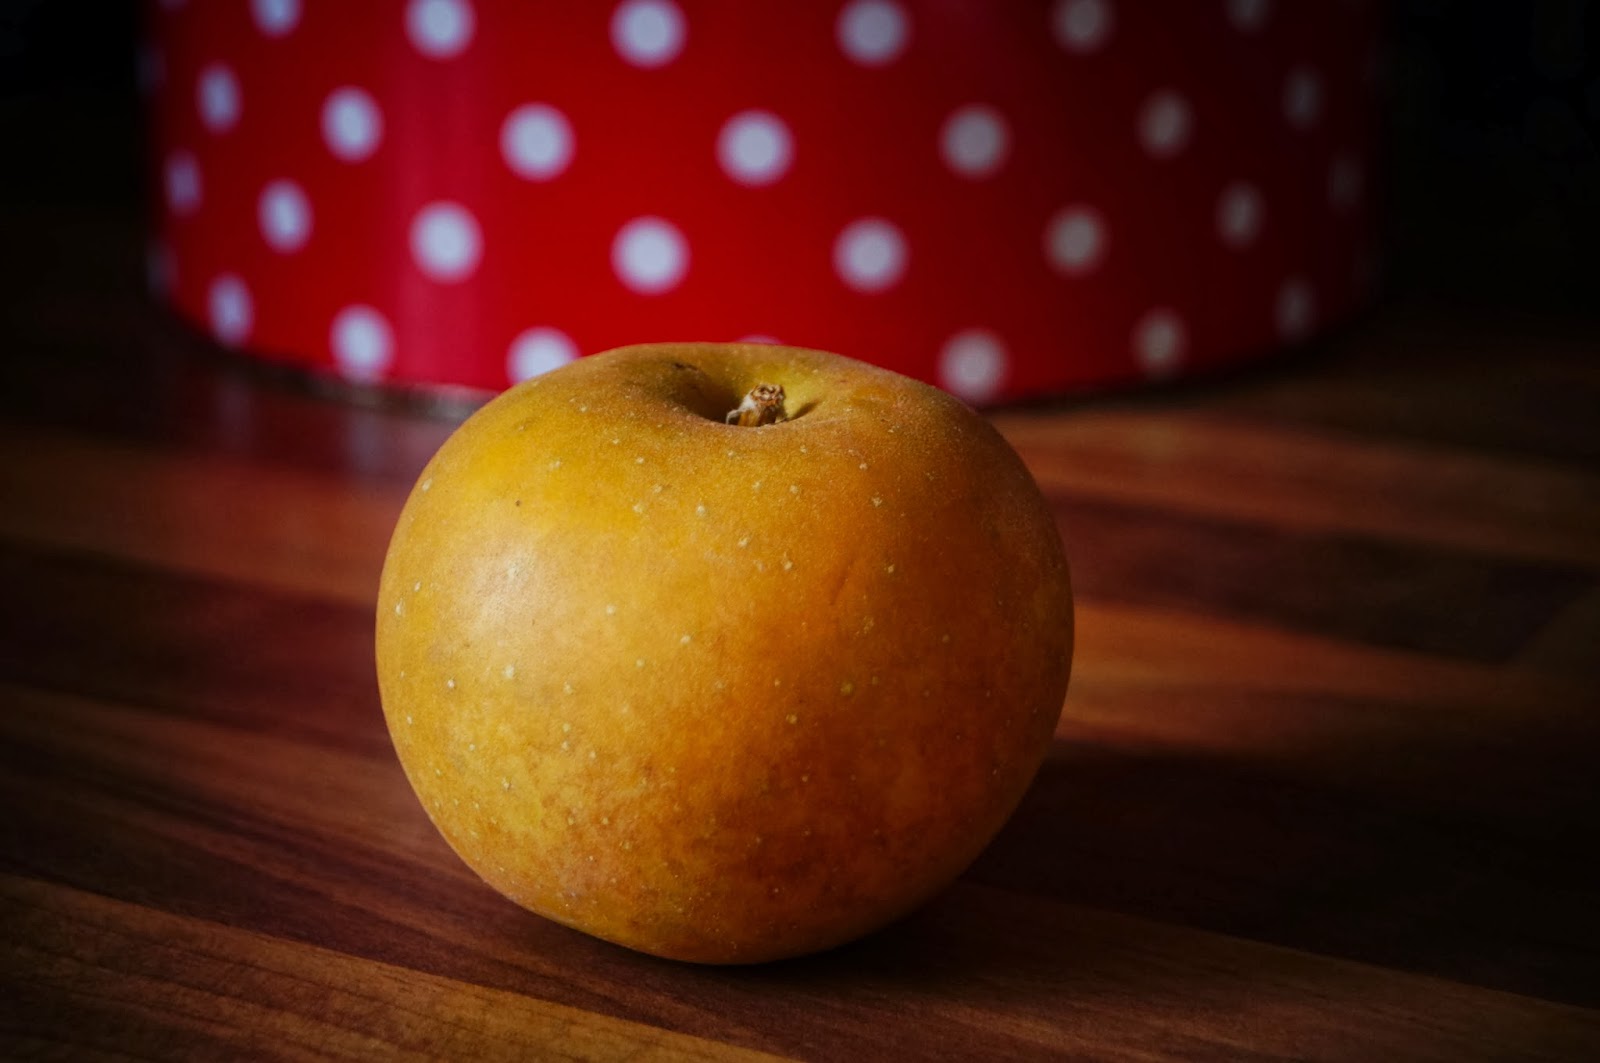 Egremont Russet Apple - 'Grow Our Own' Allotment Blog